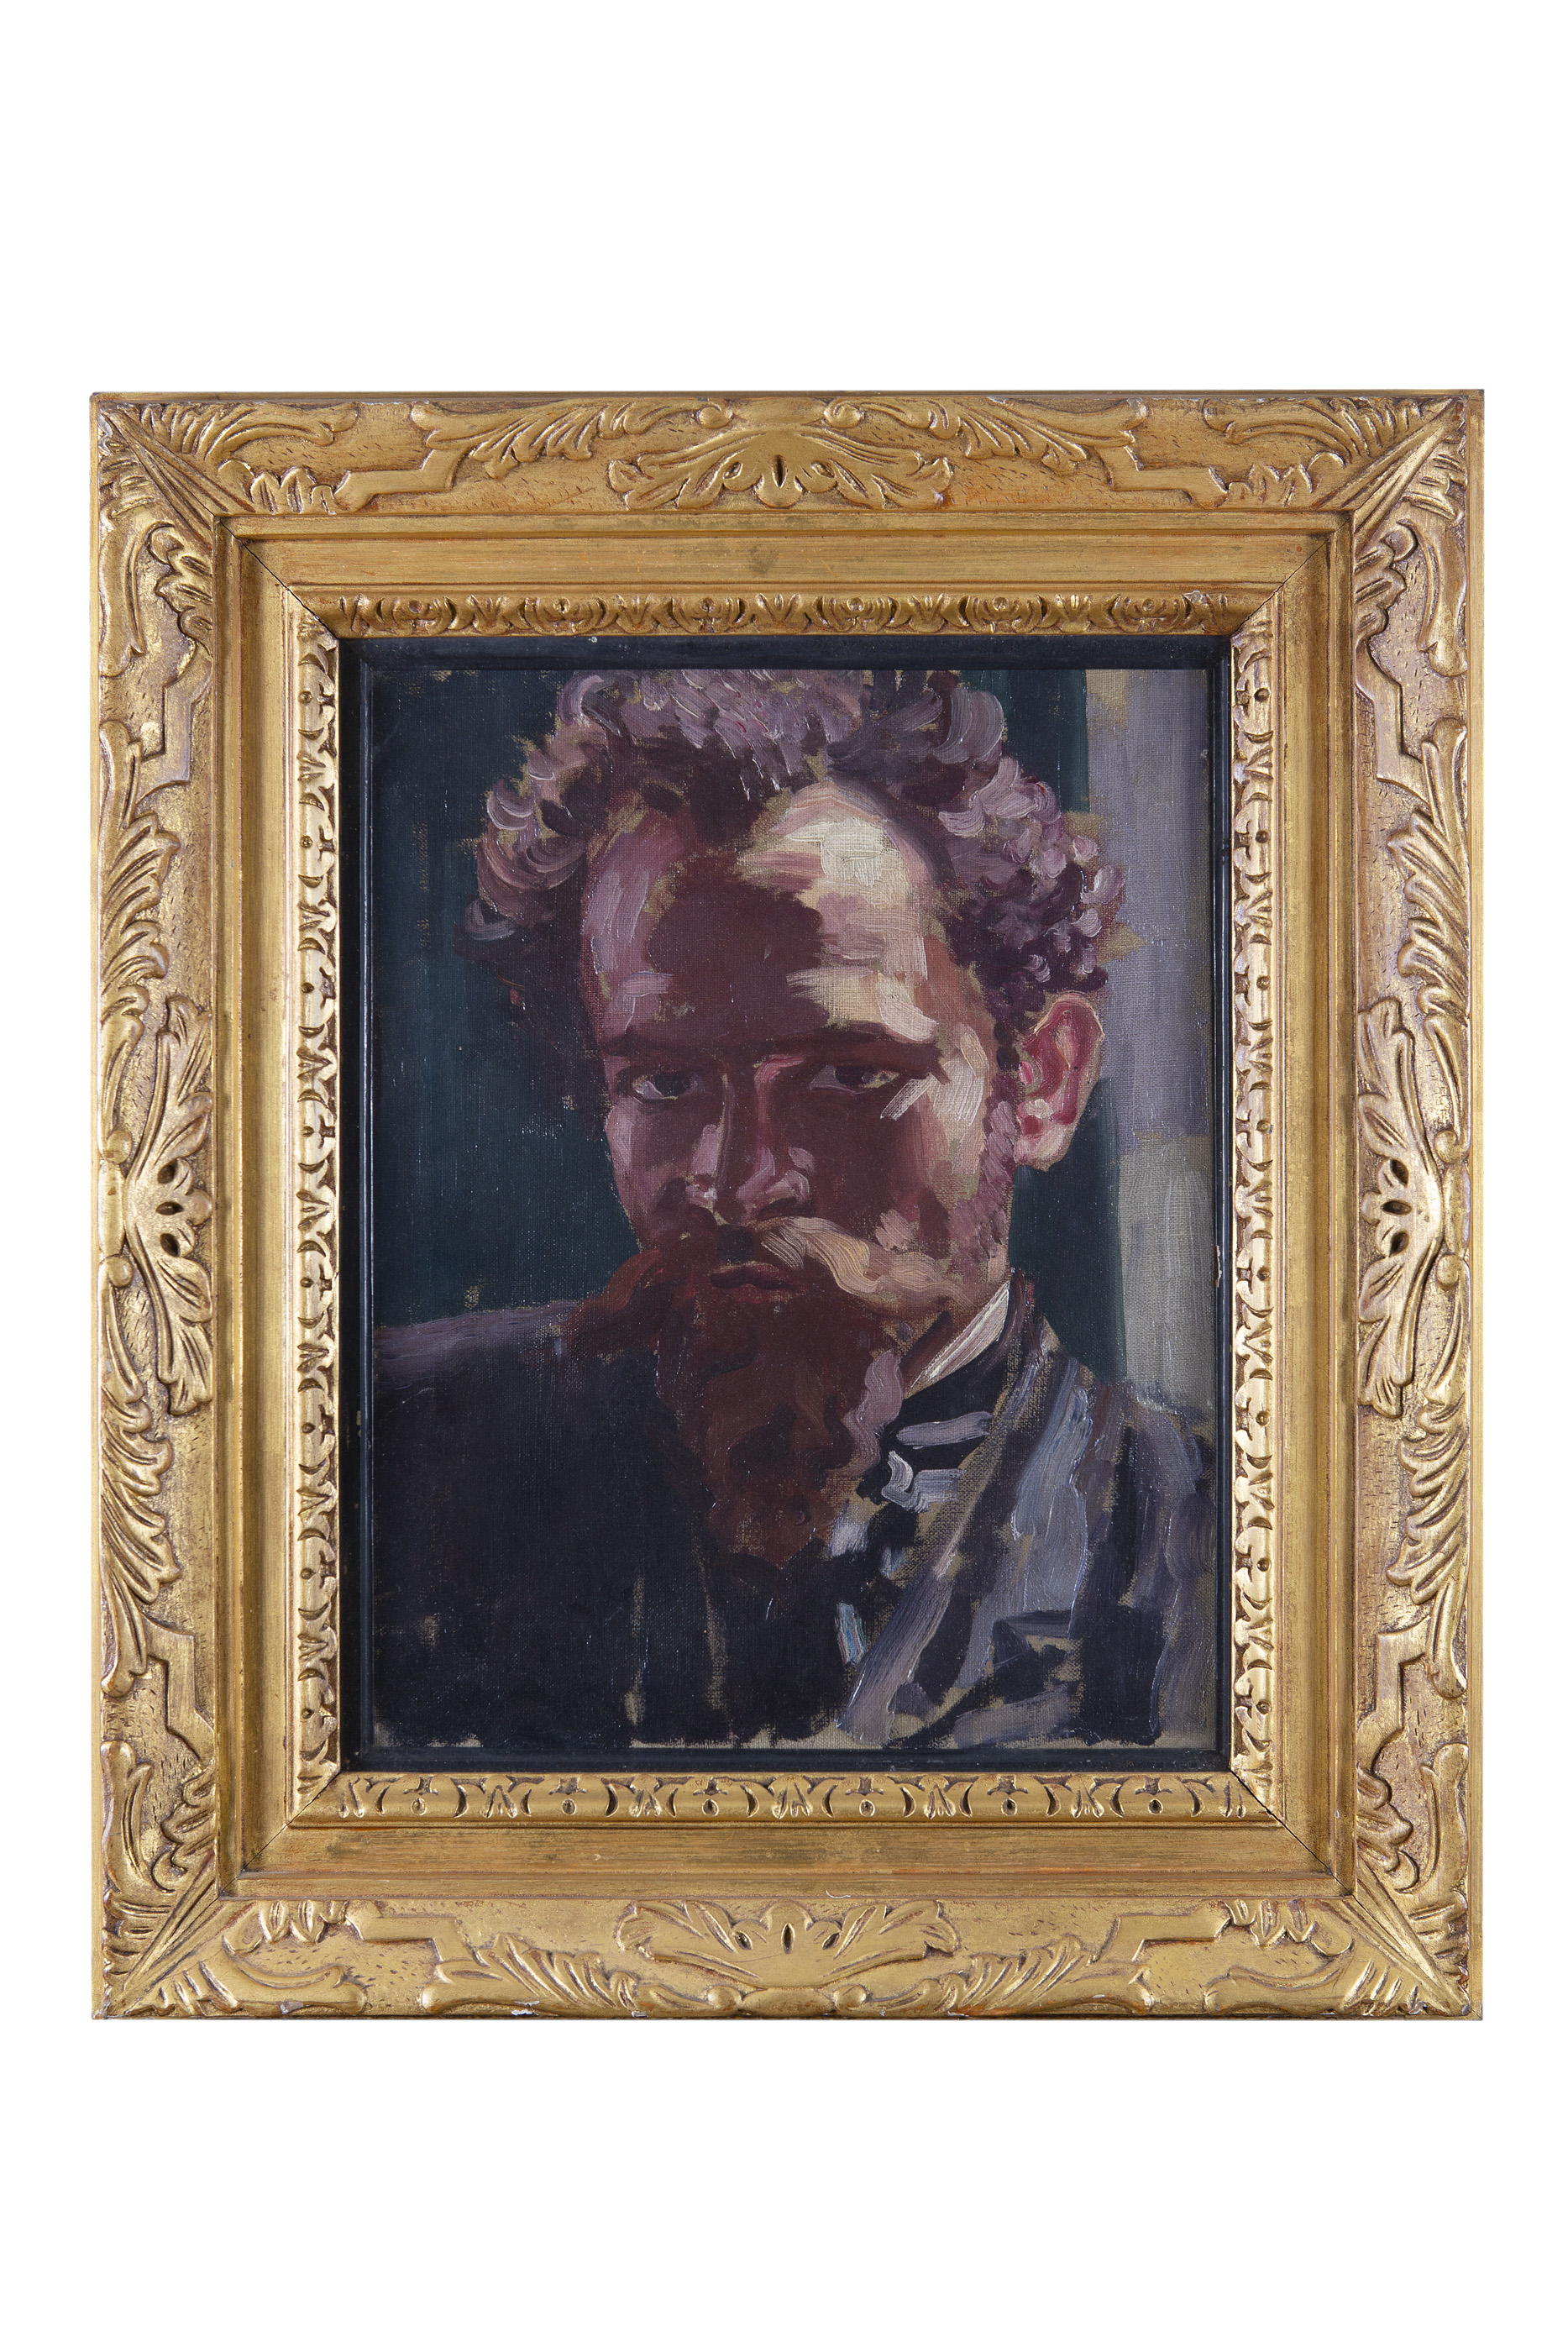 ***WITHDRAWN*** John OM RA (1878-1961)Self PortraitOil on canvas, 46 x 35cm (18 x 13¾'')A letter is - Image 2 of 3